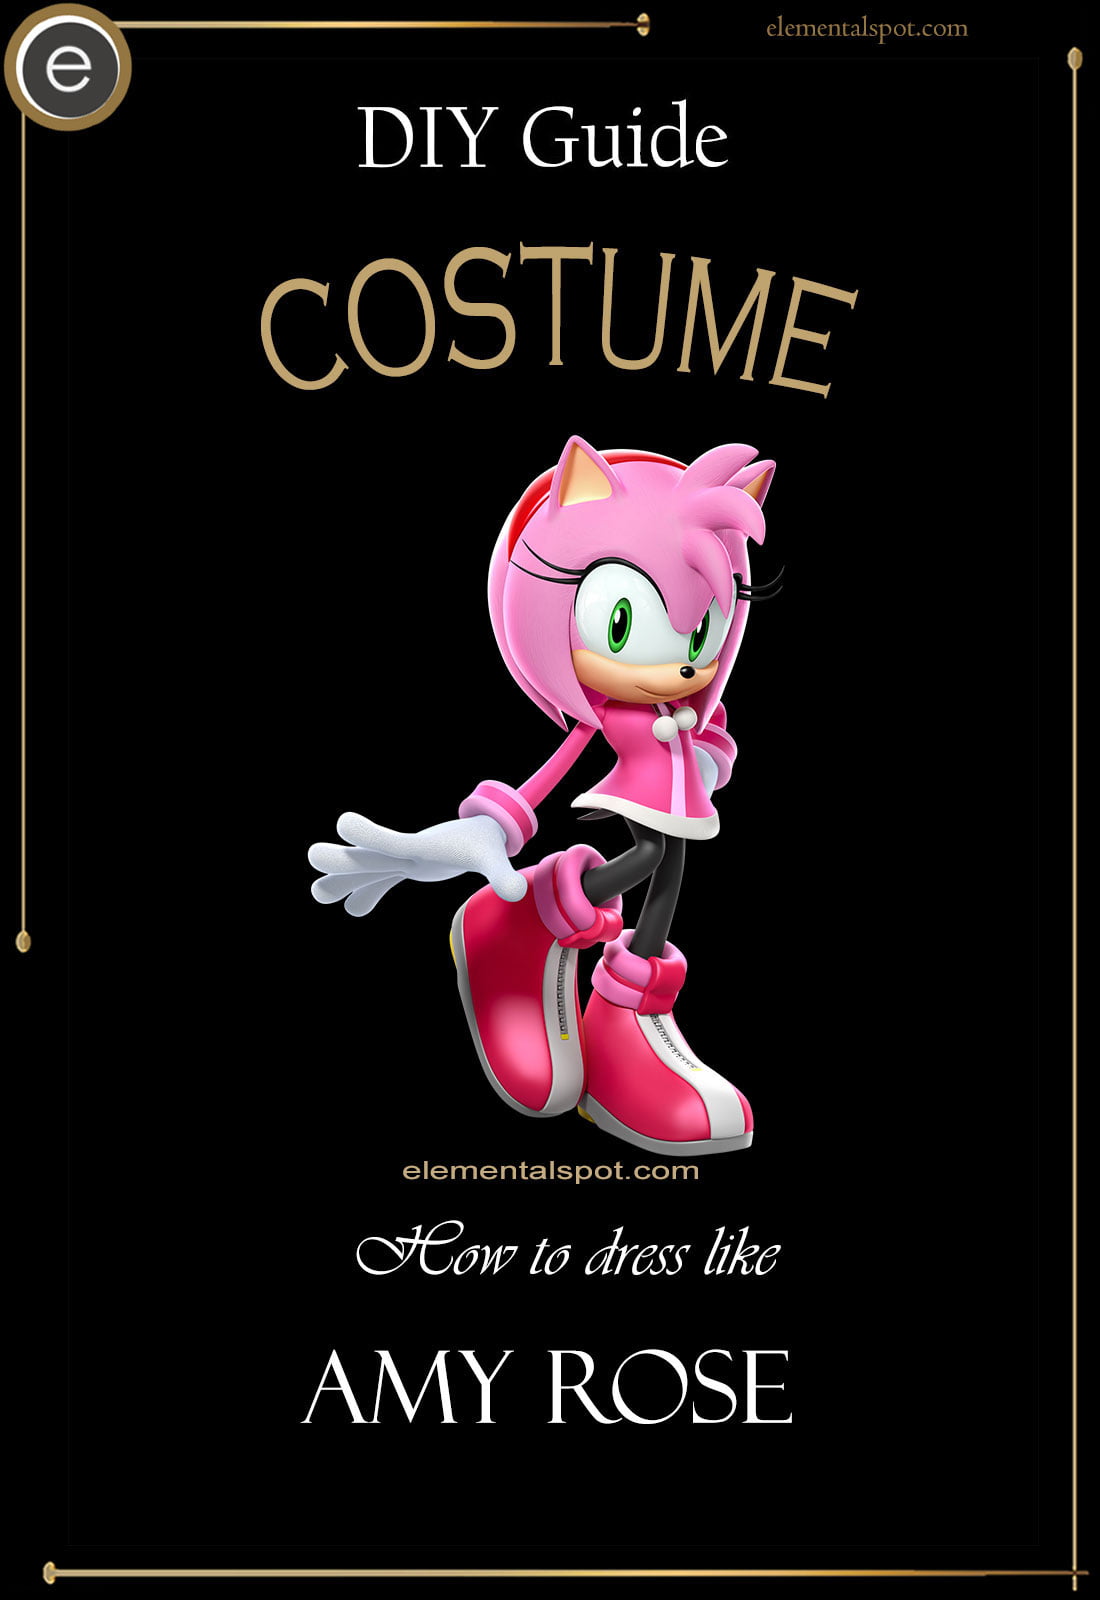 Amy Rose from Sonic the Hedgehog Costume, Carbon Costume